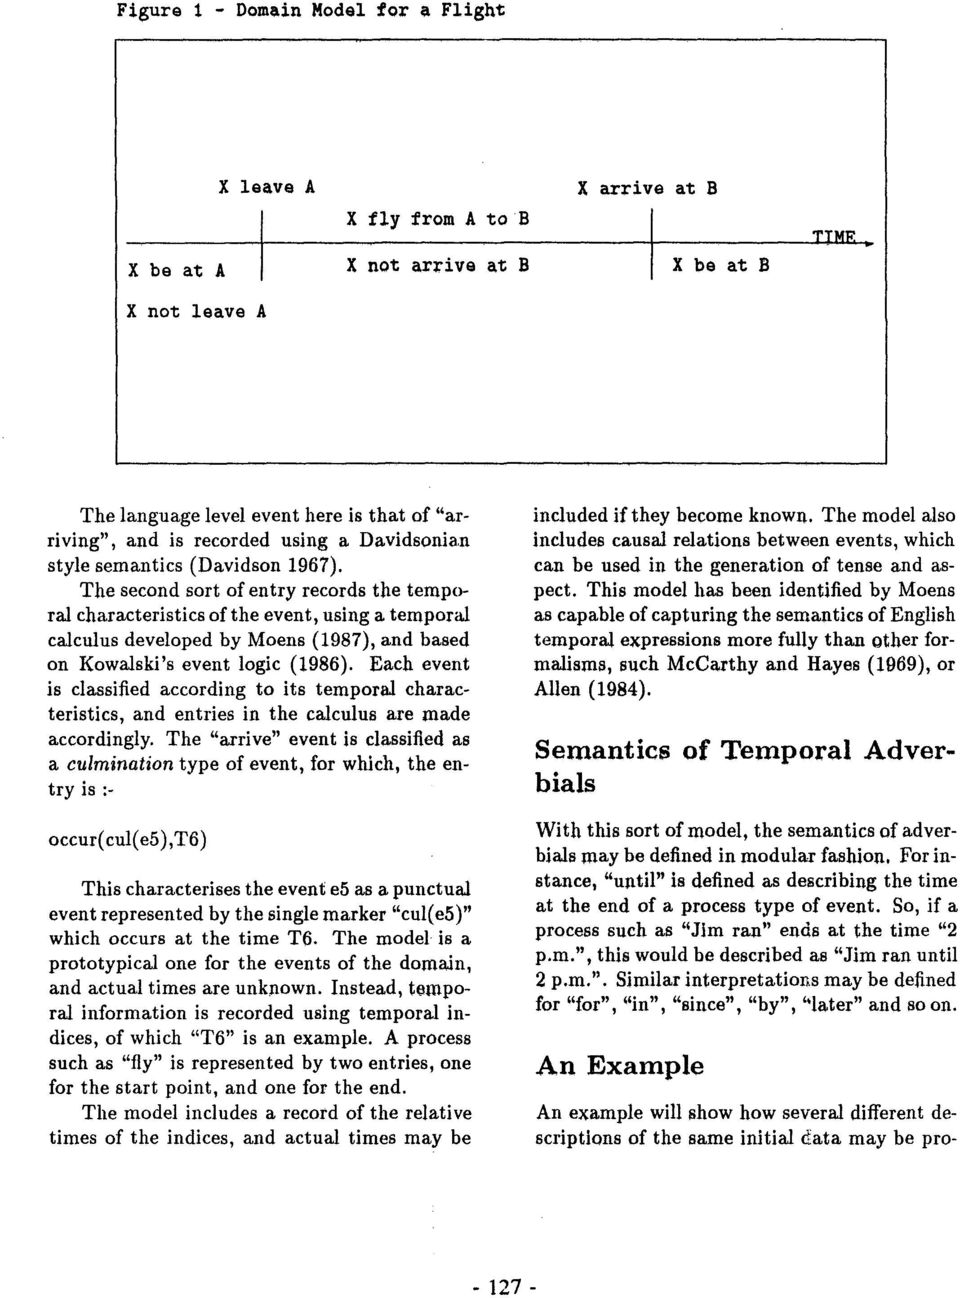 The second sort of entry records the temporal characteristics of the event, using a temporm calculus developed by Moens (1987), and based on Kowalski's event logic (1986).